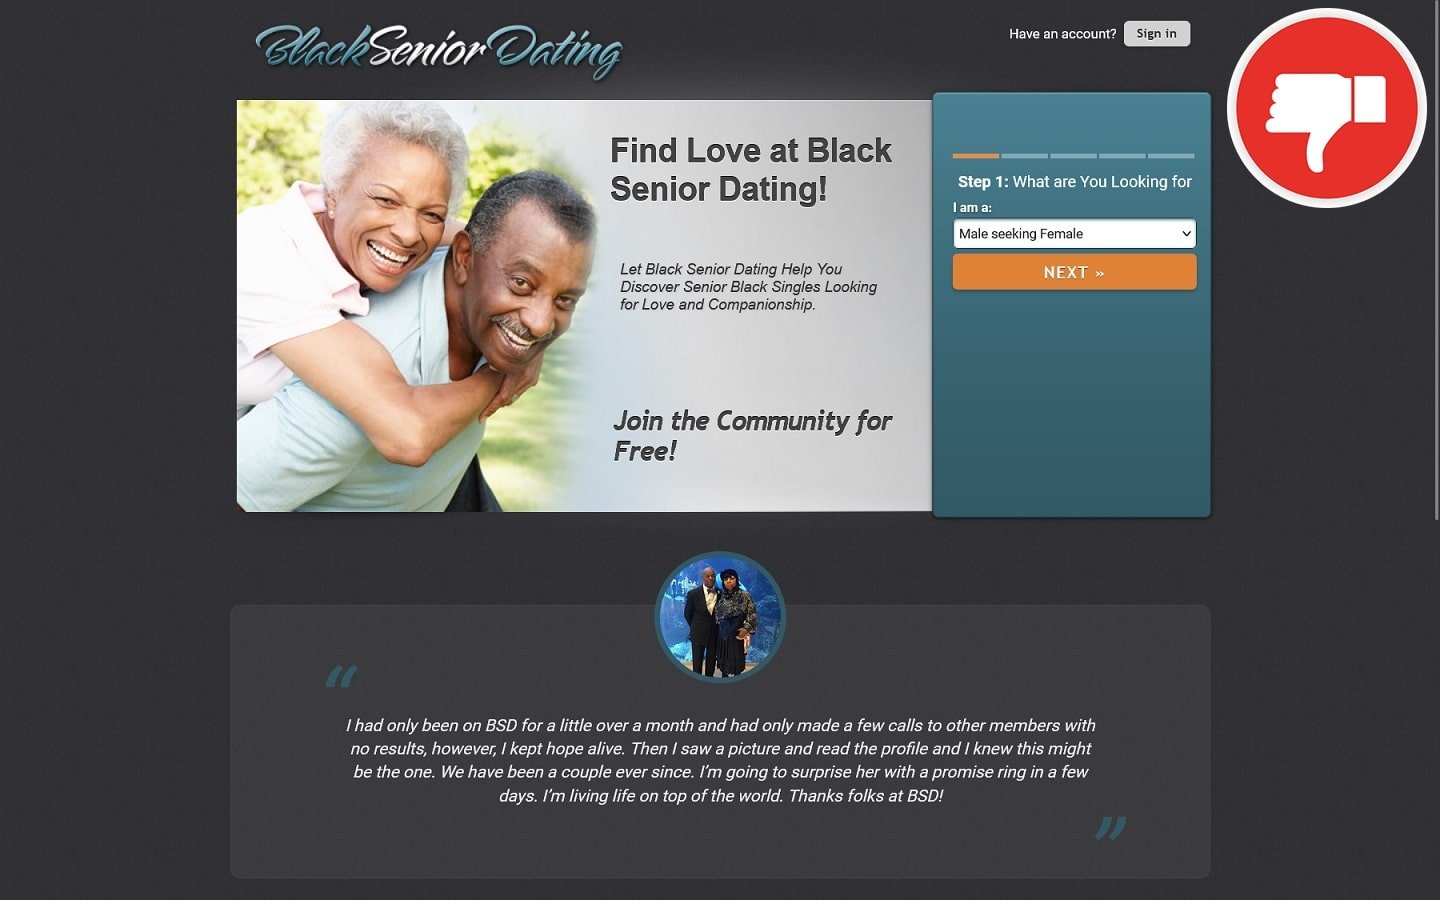 Review BlackSeniorDating.net scam experience